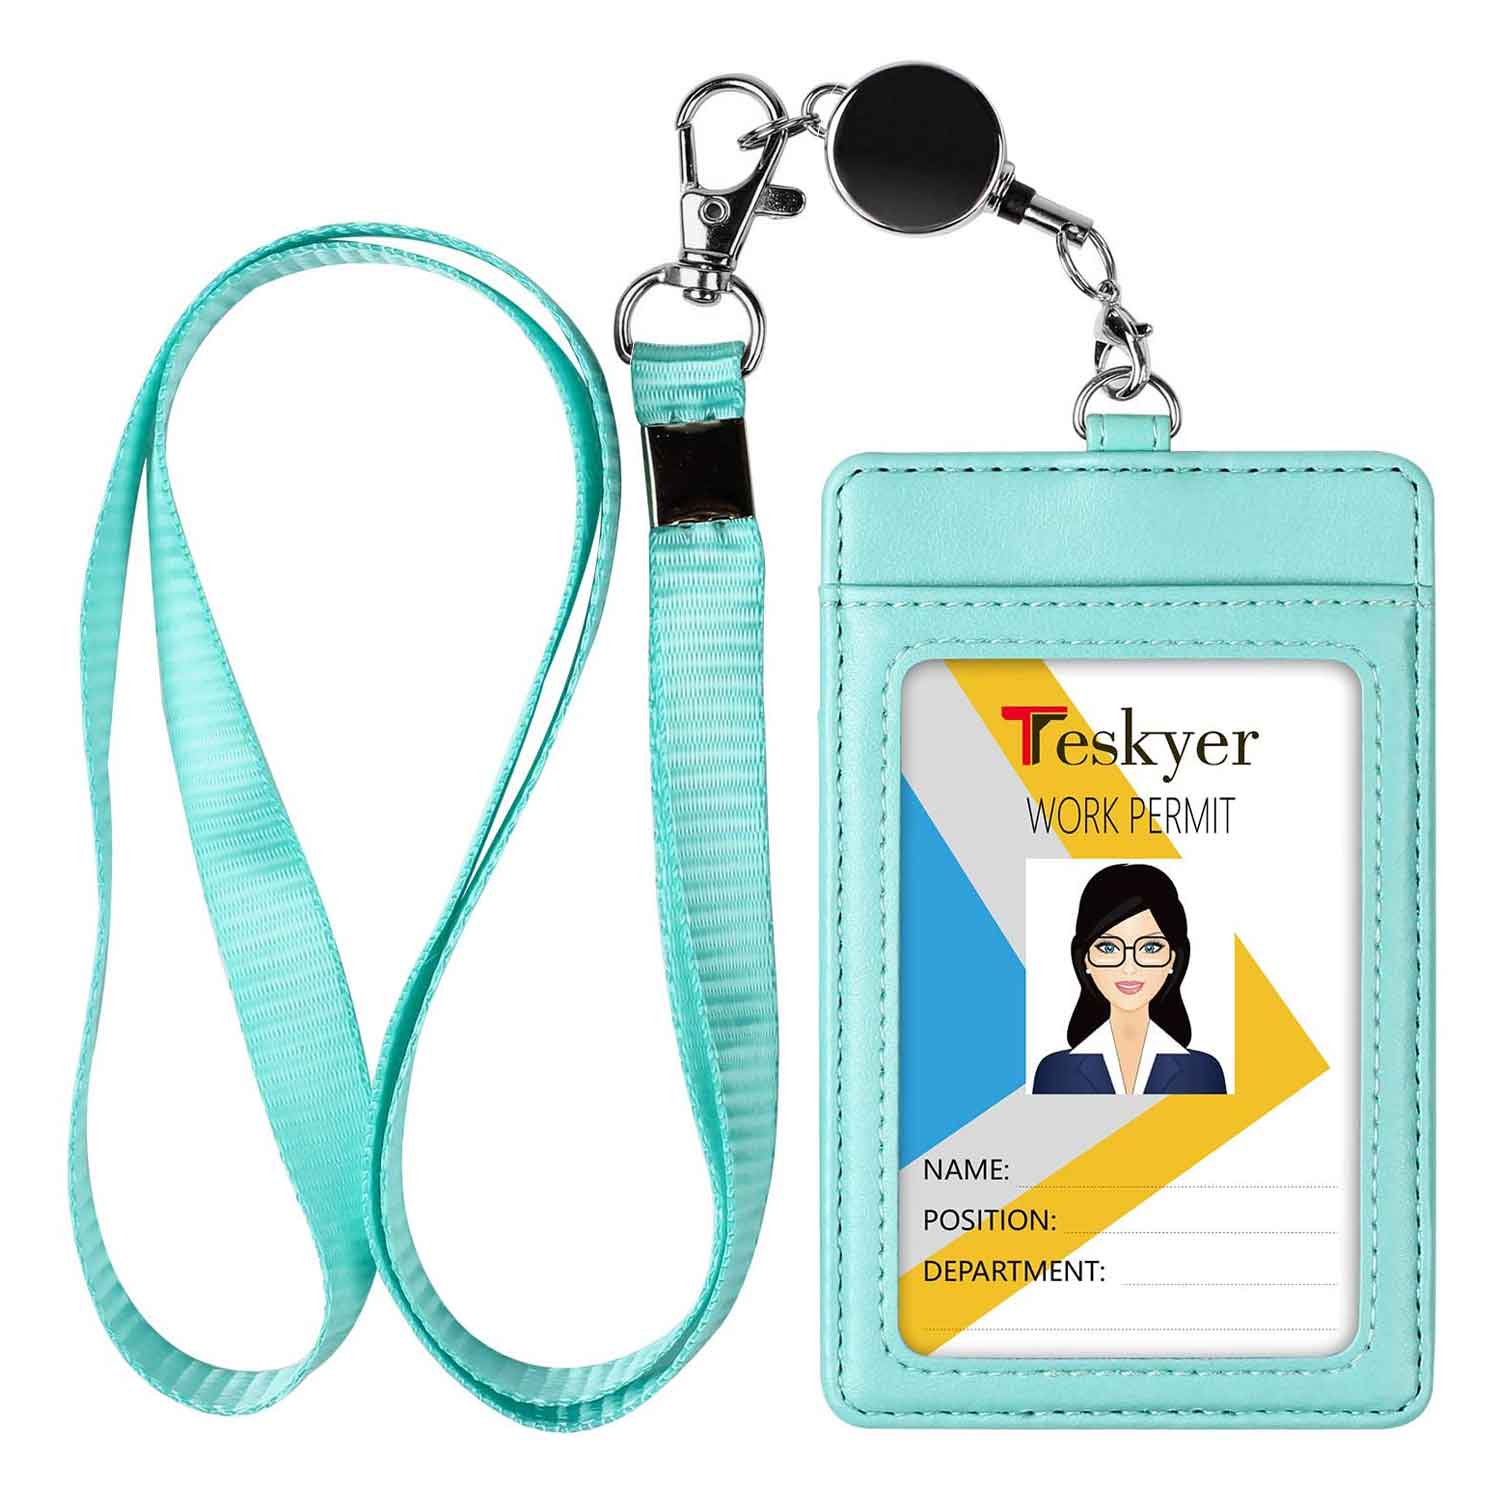 ELV Badge Holder with Zipper, PU Leather ID Badge Card Holder Wallet with 5 Card Slots, 1 Side RFID Blocking Pocket and 20 inch Neck Lanyard Strap